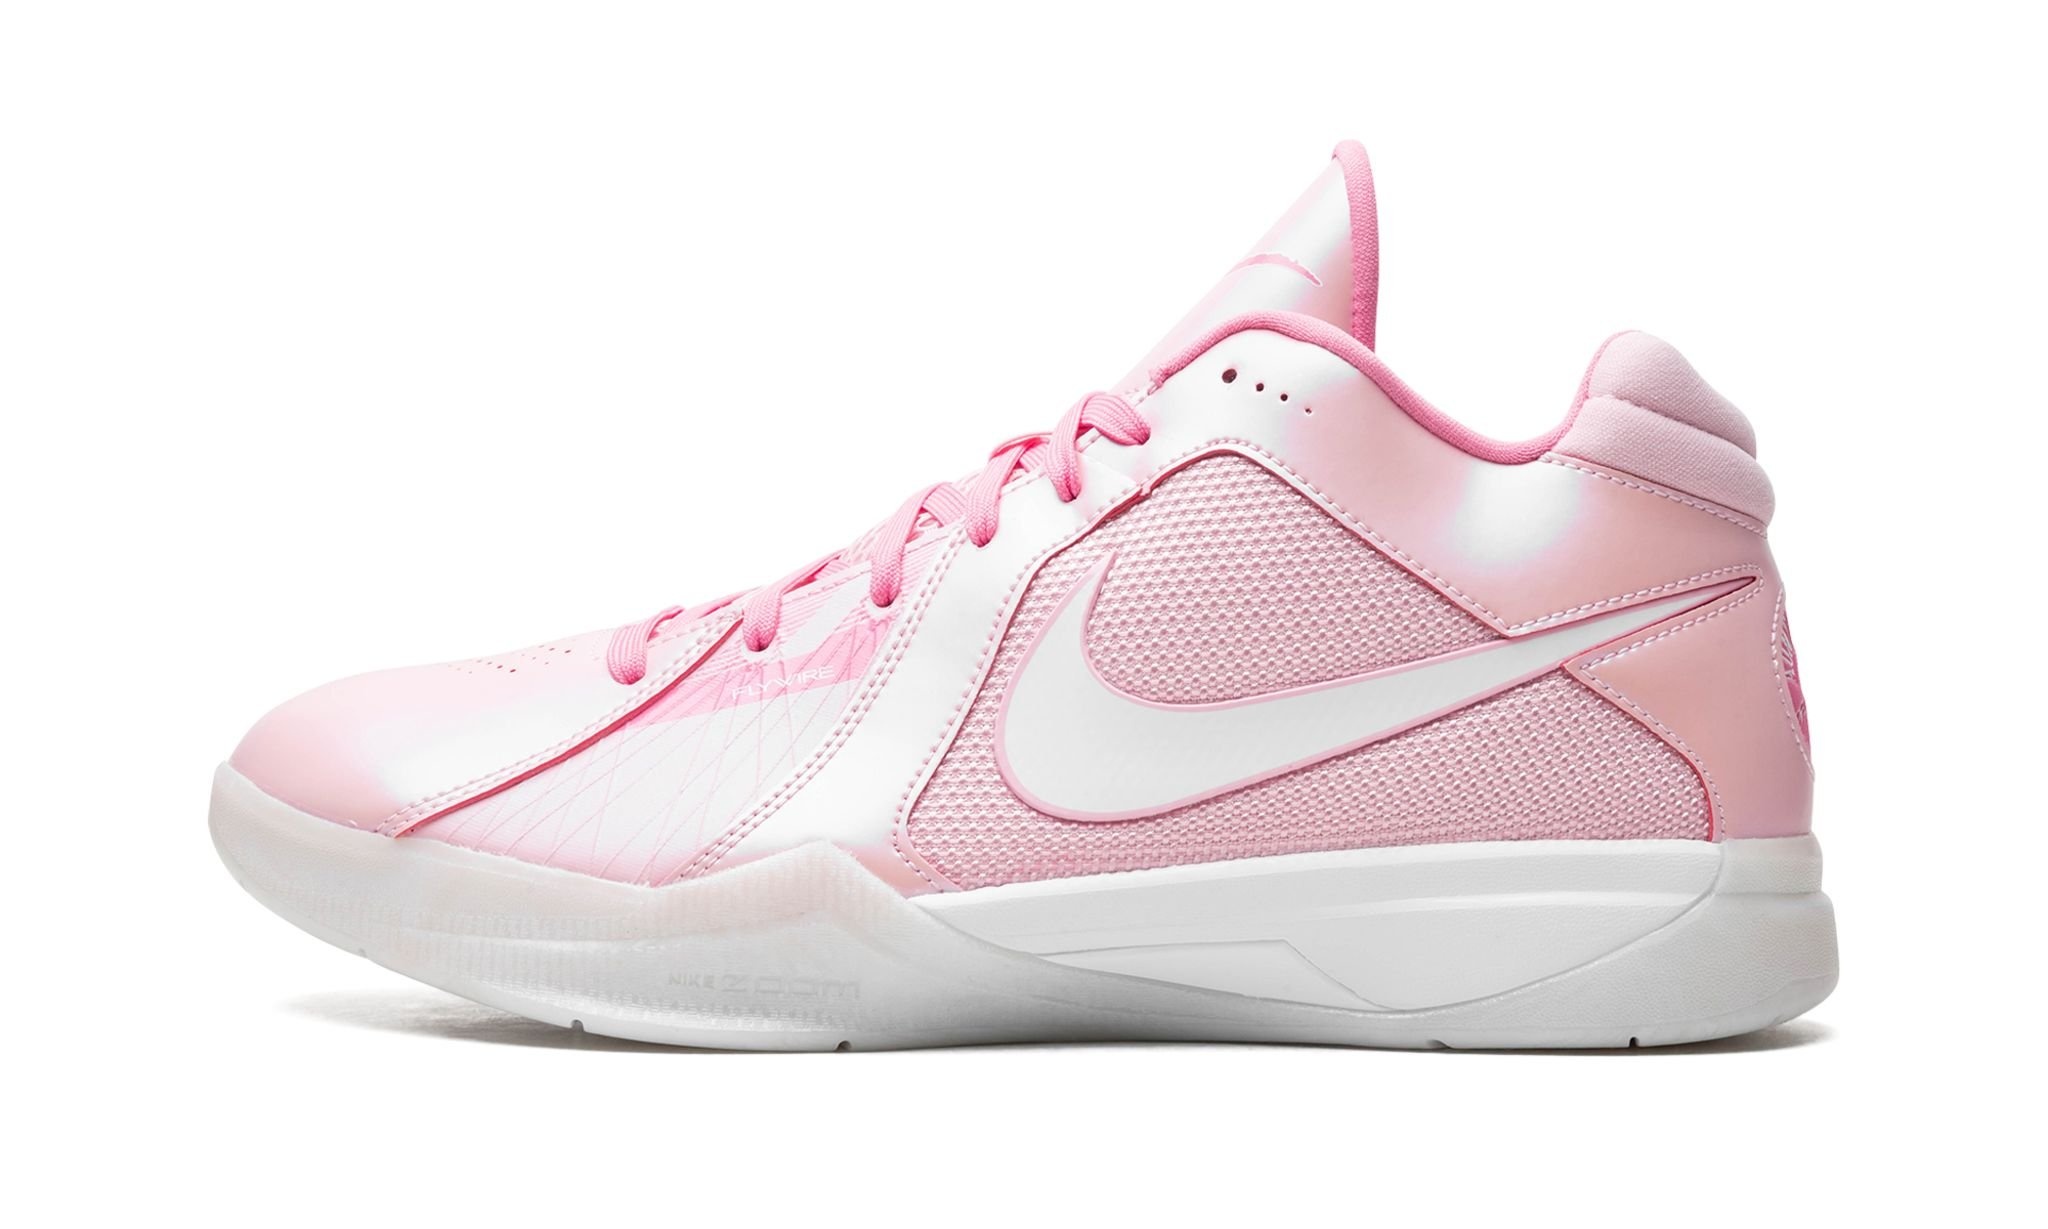 KD 3 "Aunt Pearl" - 1